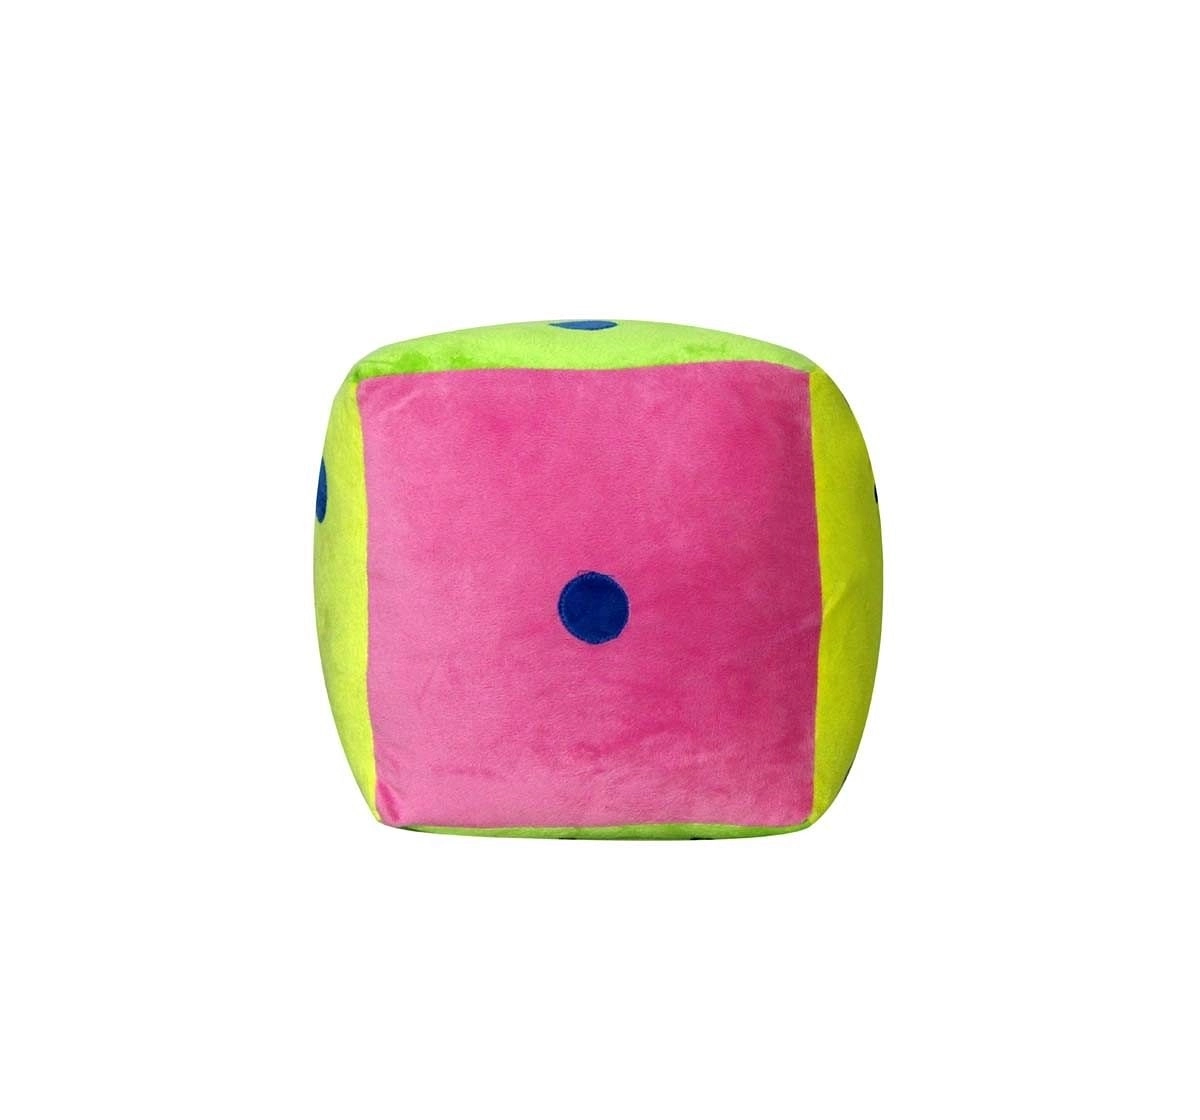 Soft Buddies Cube Quirky Soft Toys for Kids age 12M+ 30.48 Cm 